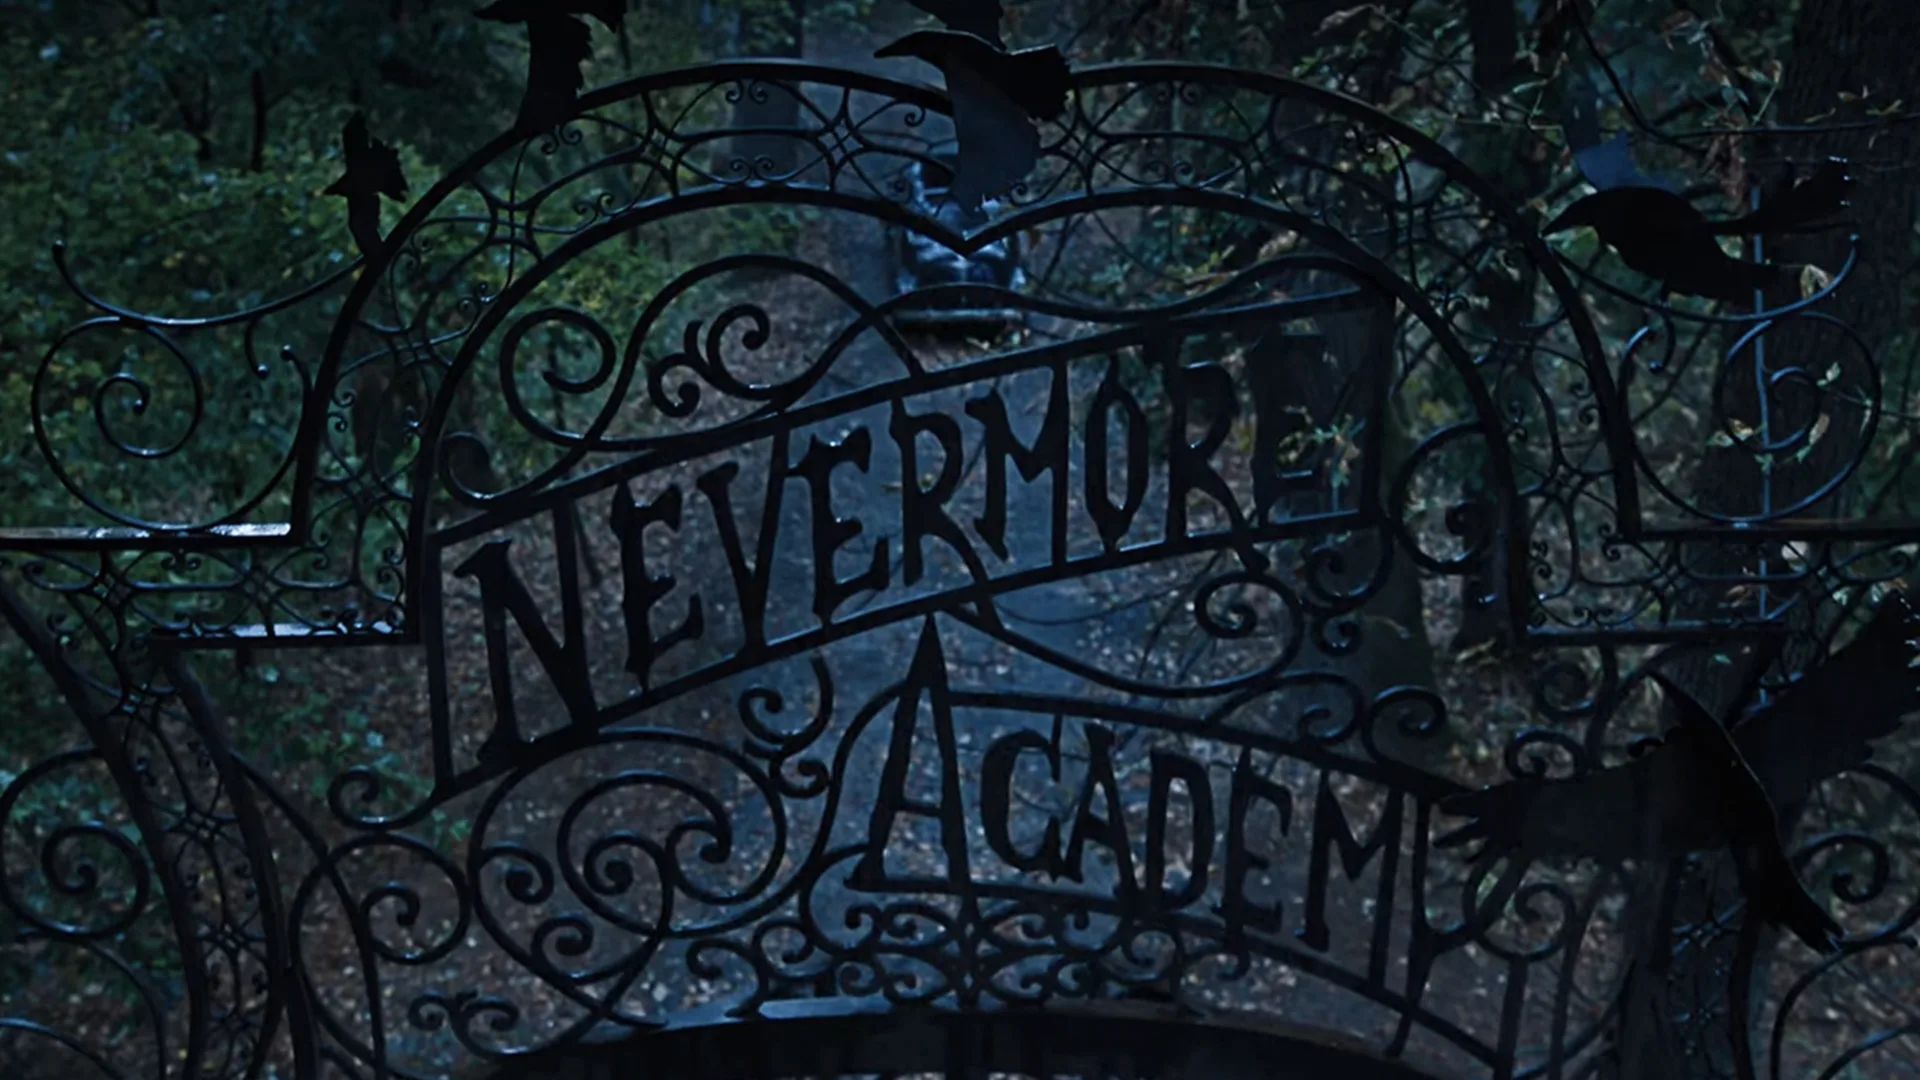 The gates of Nevermore Academy